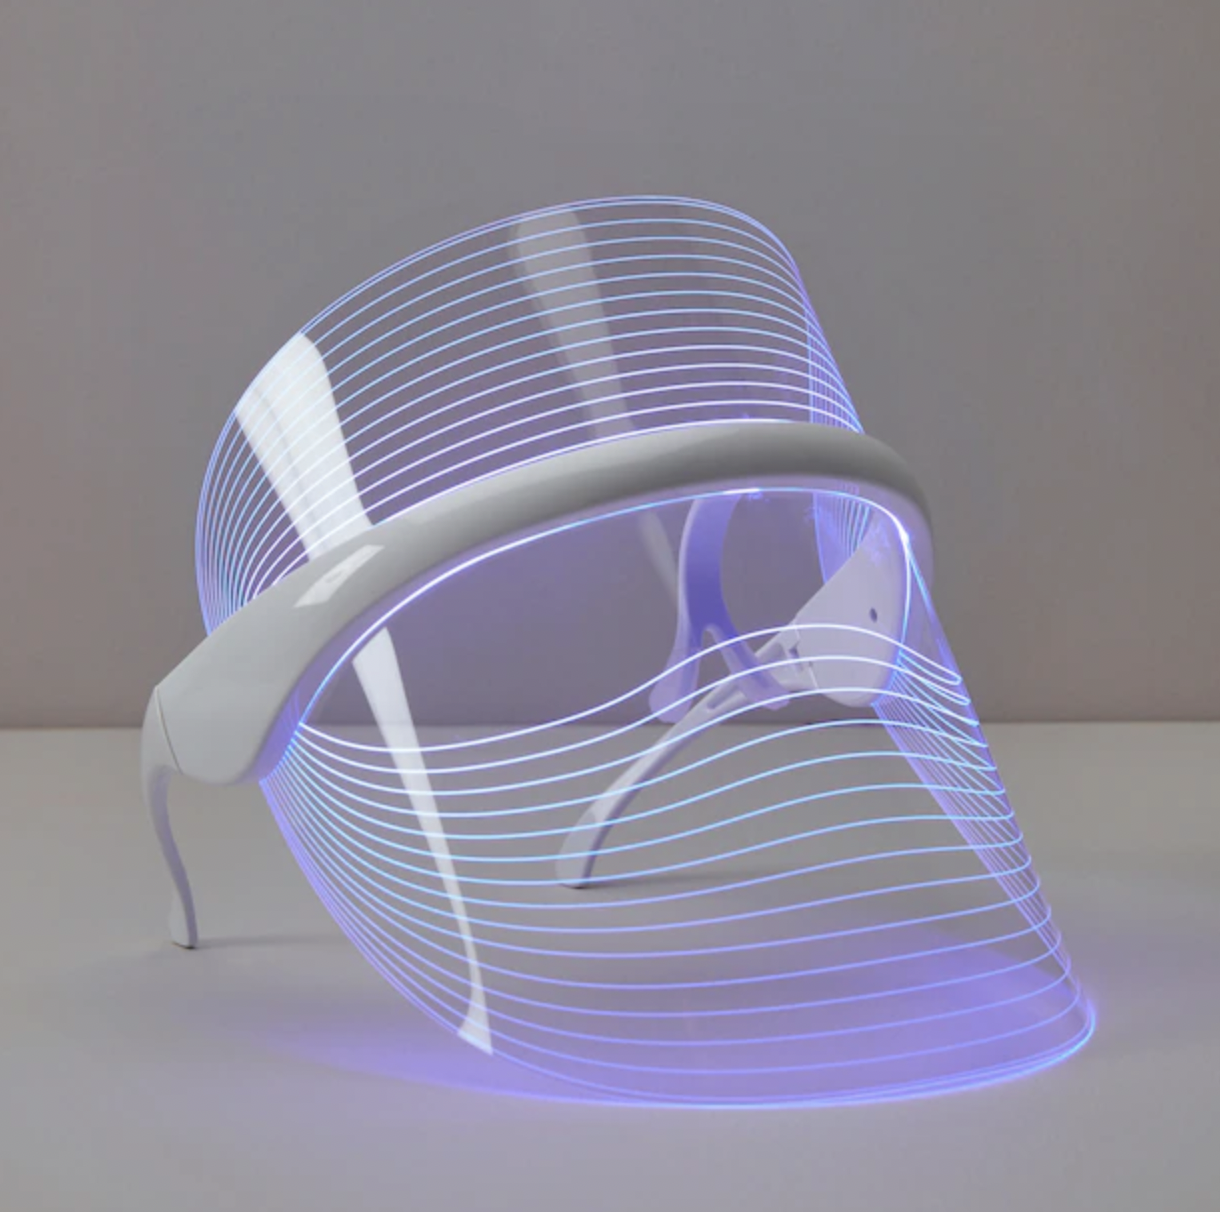 the light therapy mask on a blank background